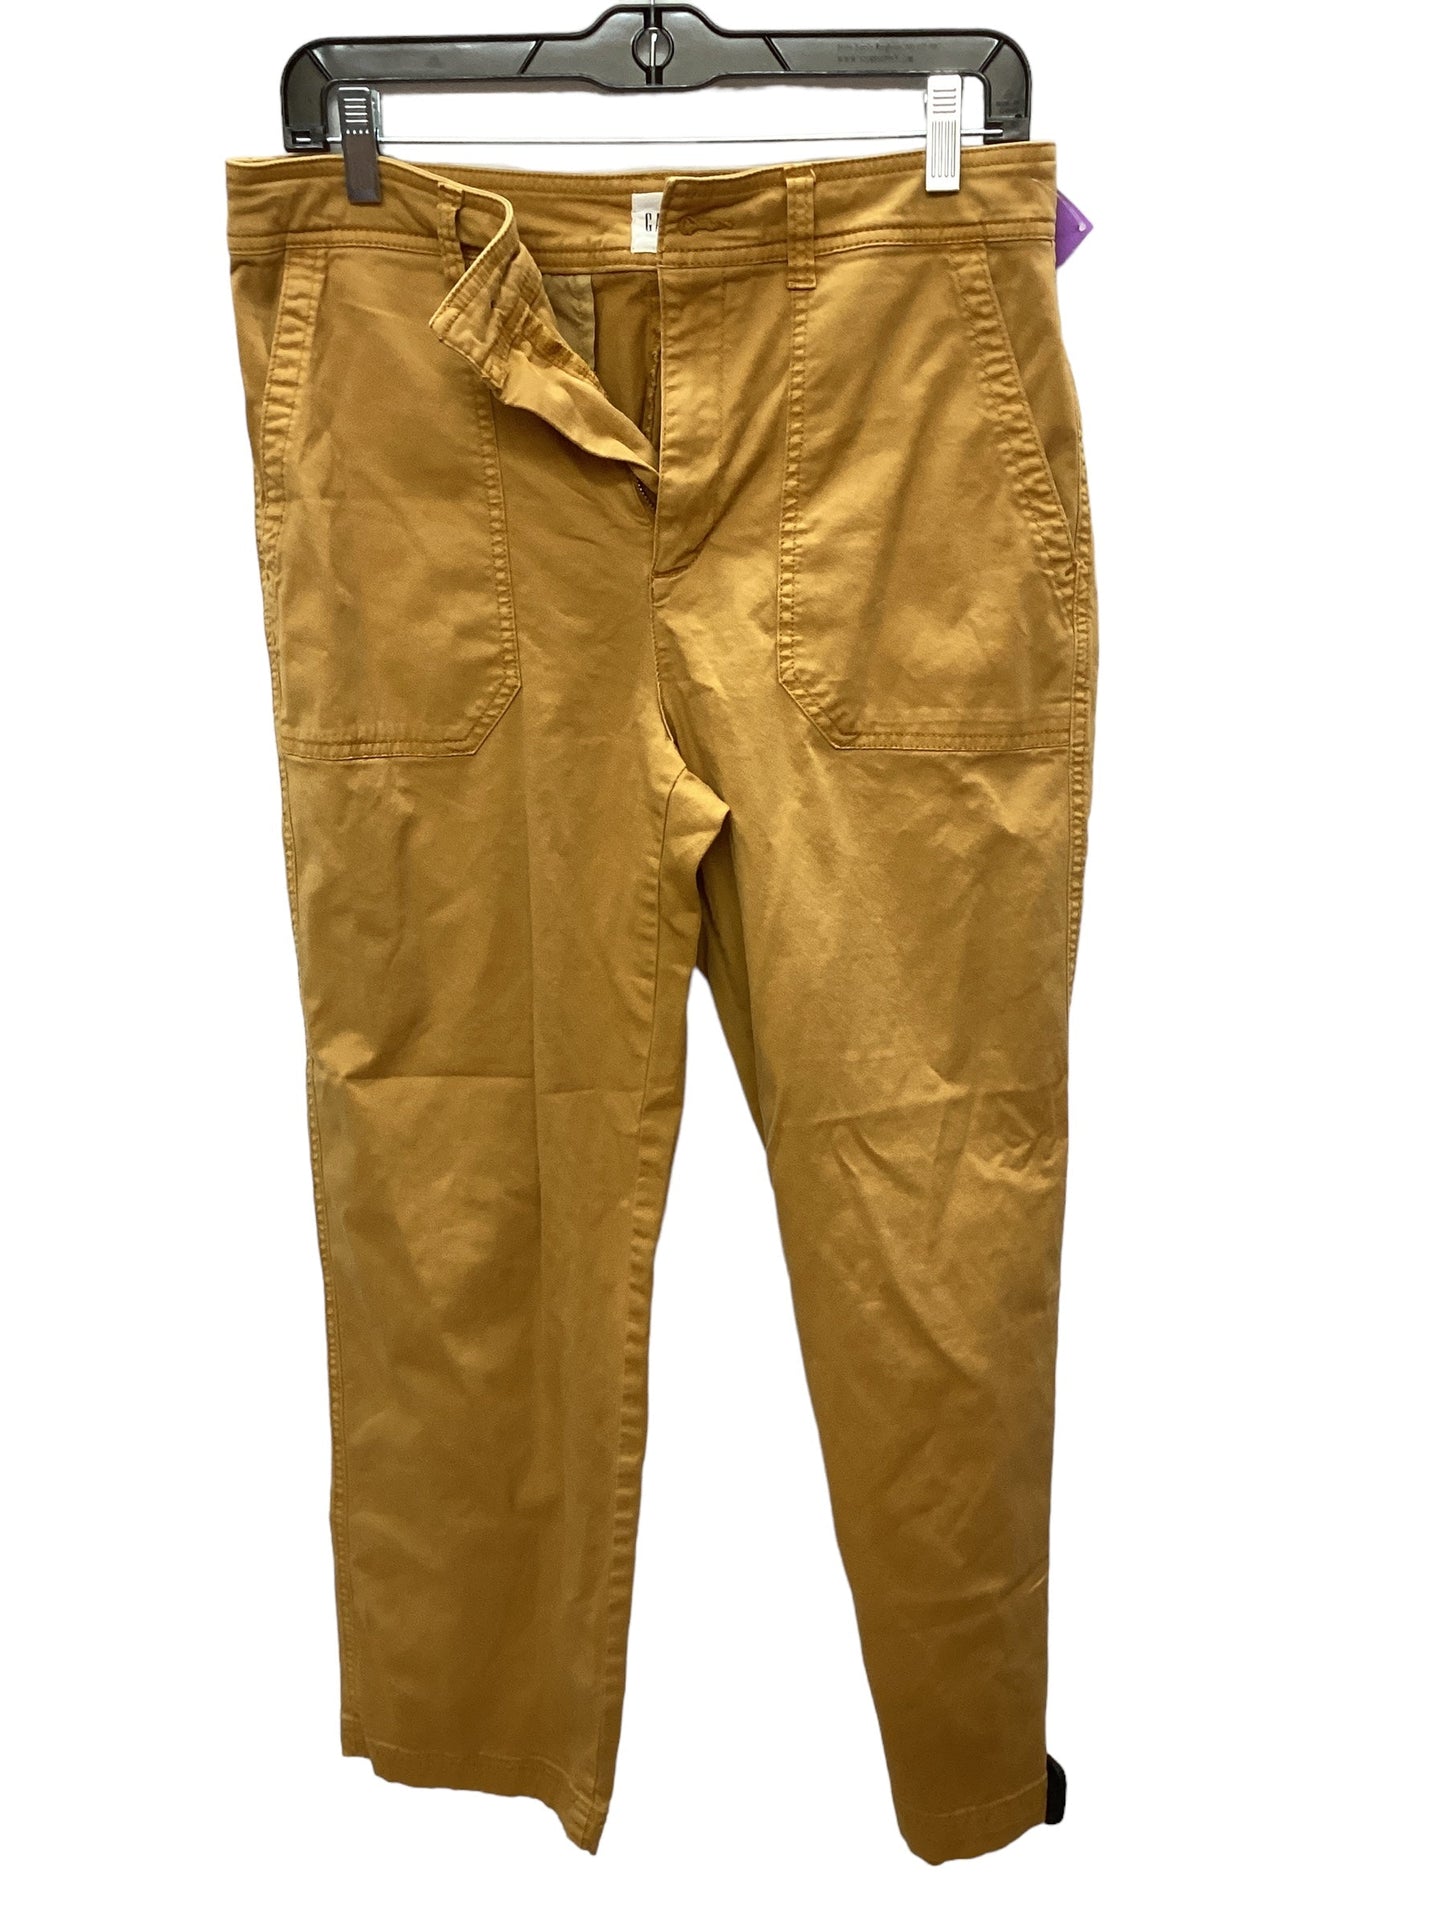 Yellow Pants Other Gap, Size 8